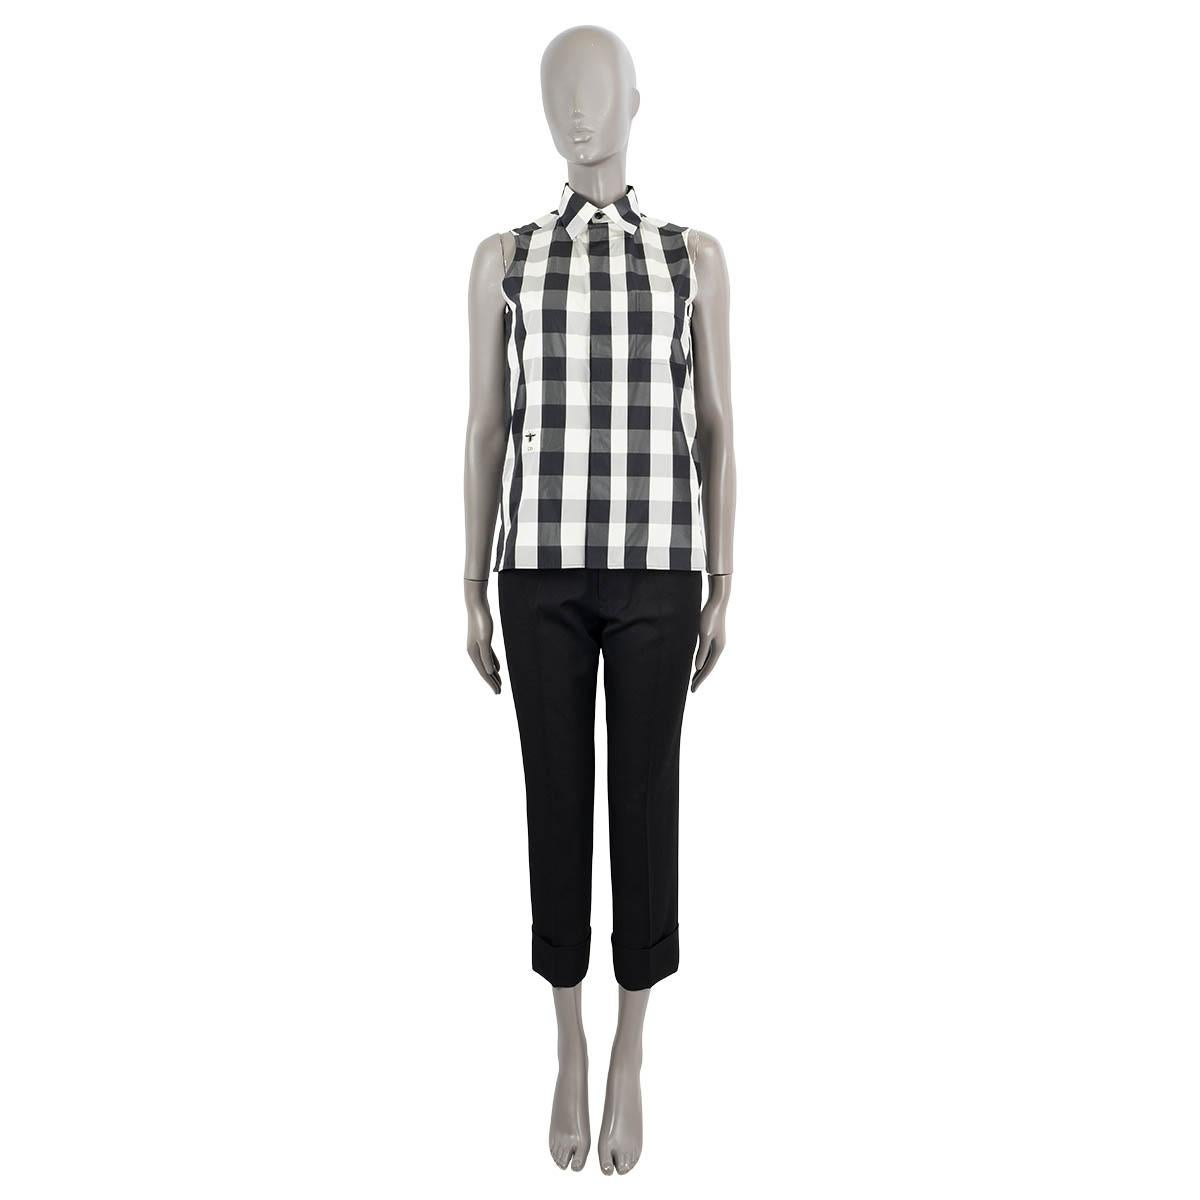 100% authentic Christian Dior 2019 sleeveless gingham blouse in black & off-white polyester (100%). The design features a concealed button line and one chest pocket. Has been worn once and is in virtually new condition.